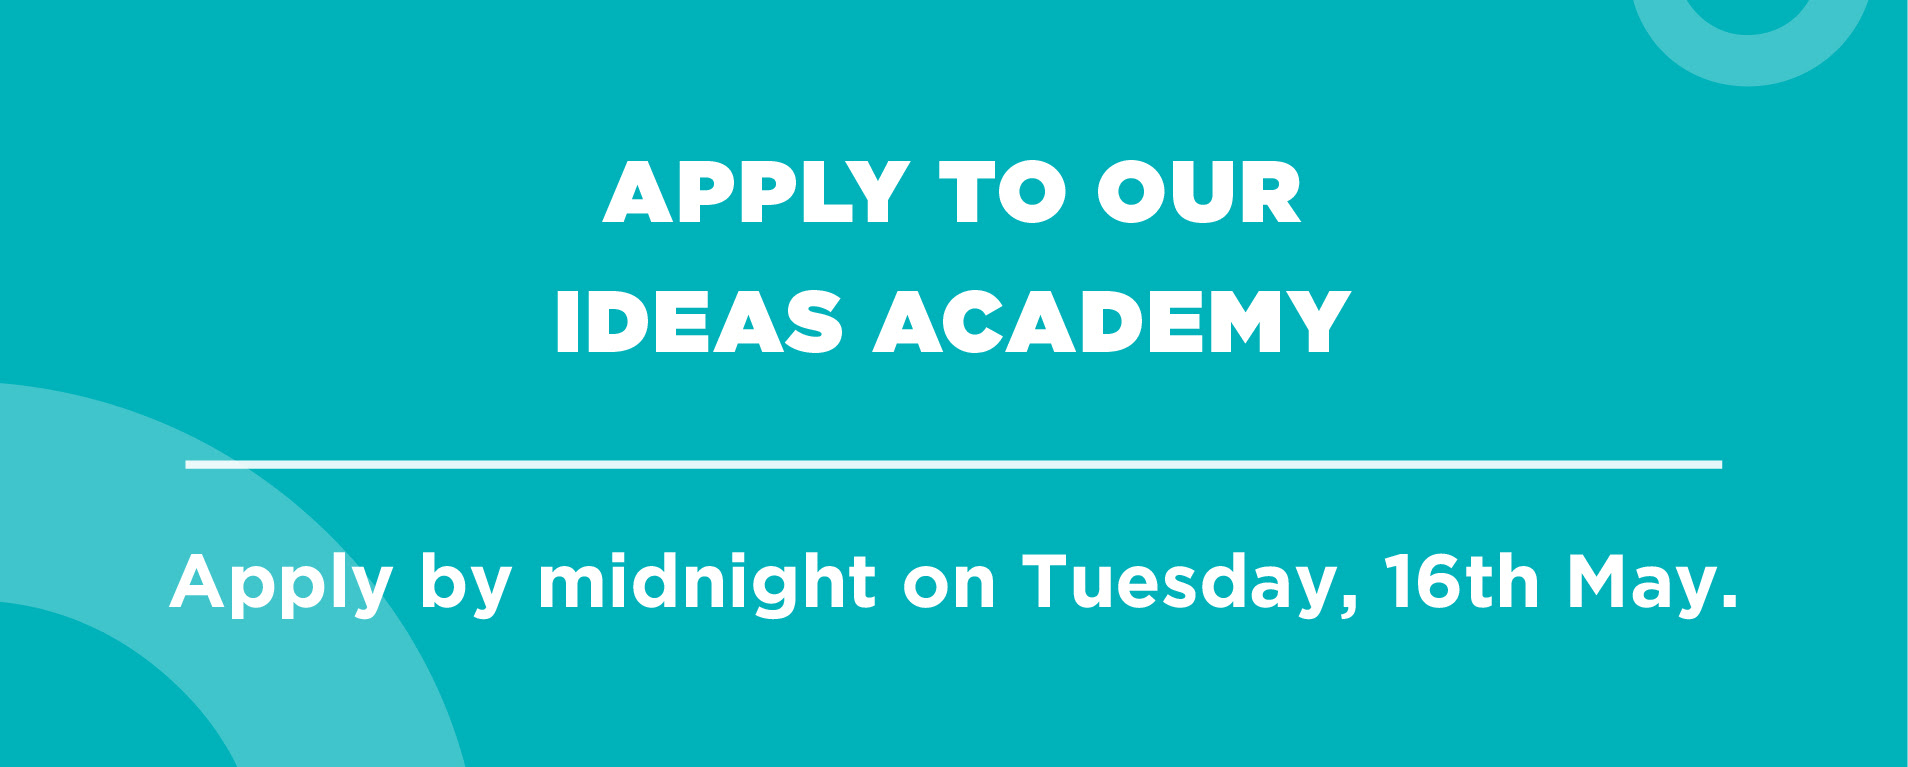 Ideas Academy call to action